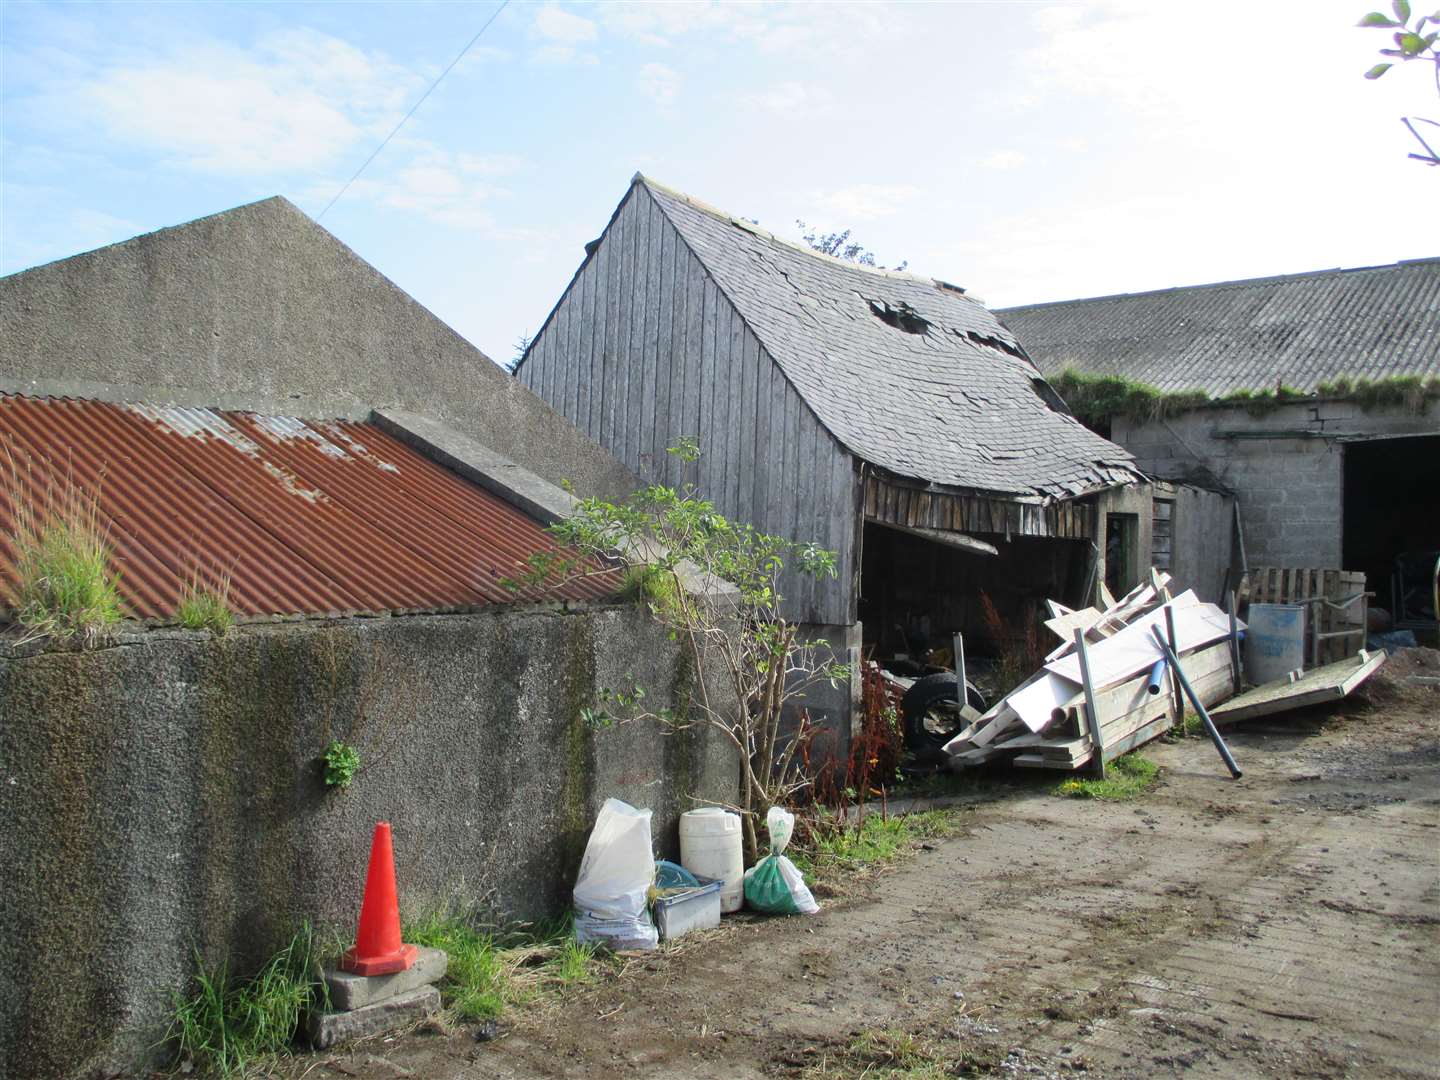 The former dairy facility at Macduff has lain empty for many years.